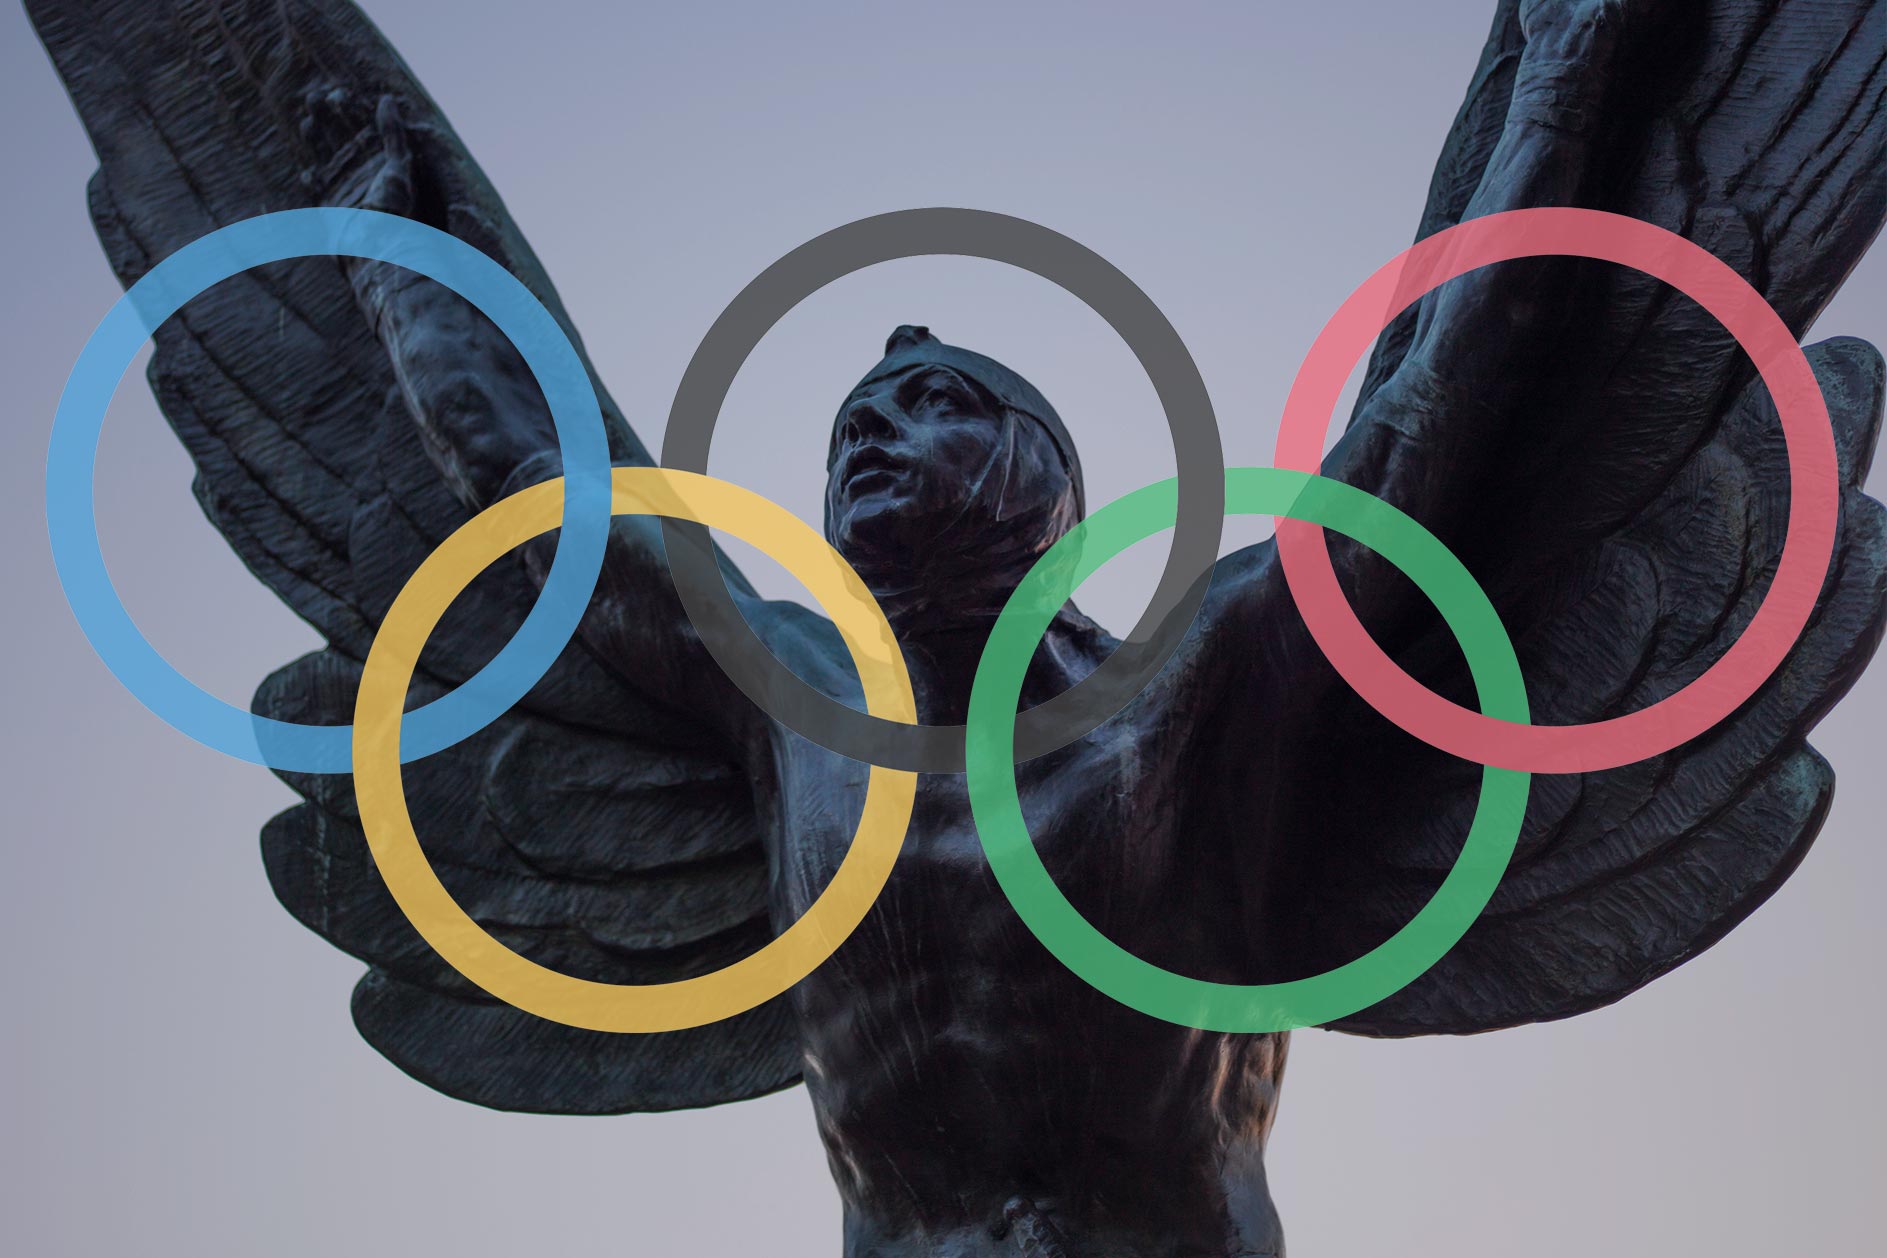 Flying man statue with Olympic rings over it